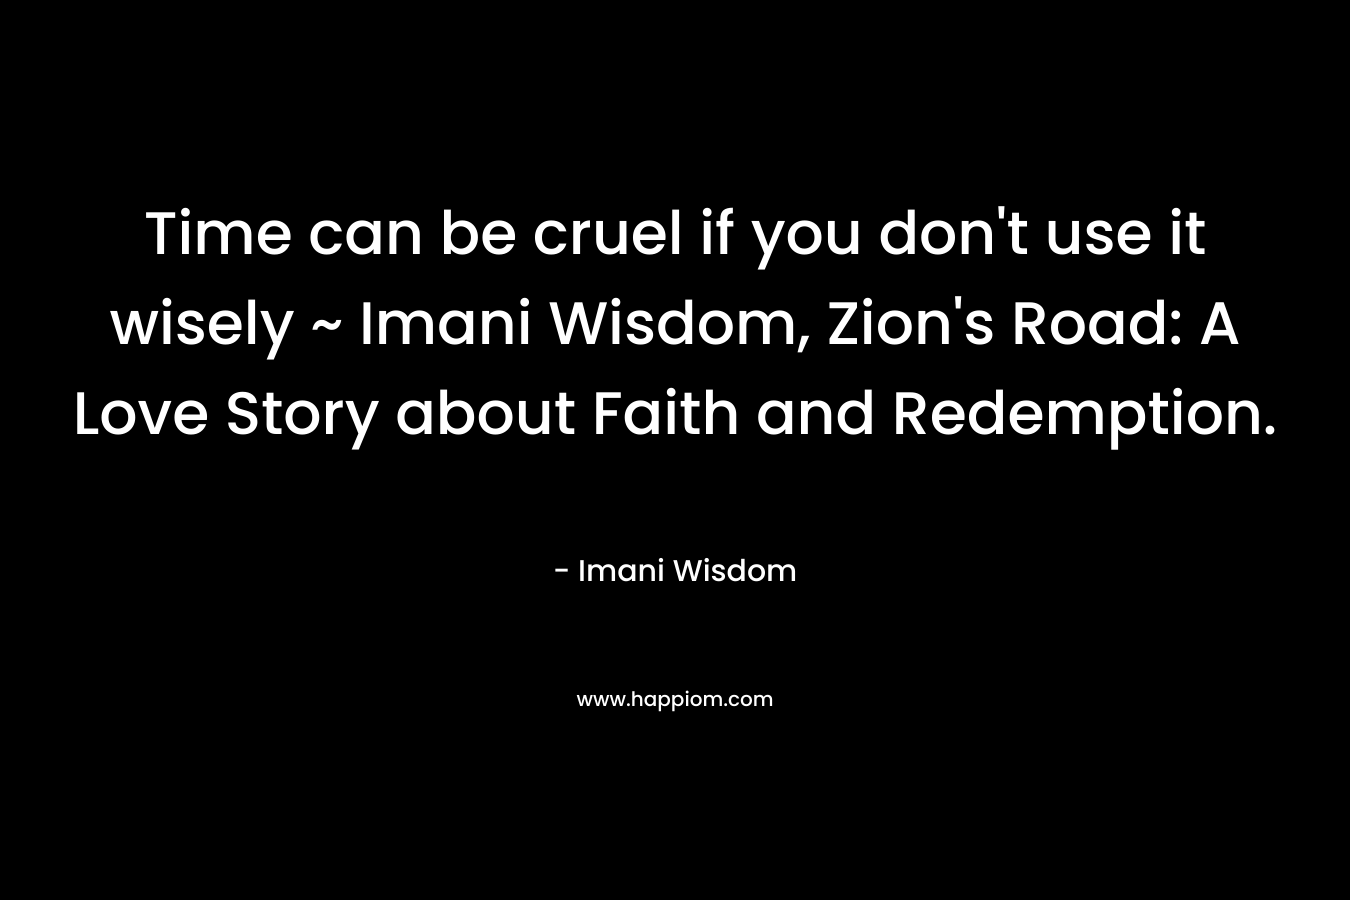 Time can be cruel if you don’t use it wisely ~ Imani Wisdom, Zion’s Road: A Love Story about Faith and Redemption. – Imani Wisdom